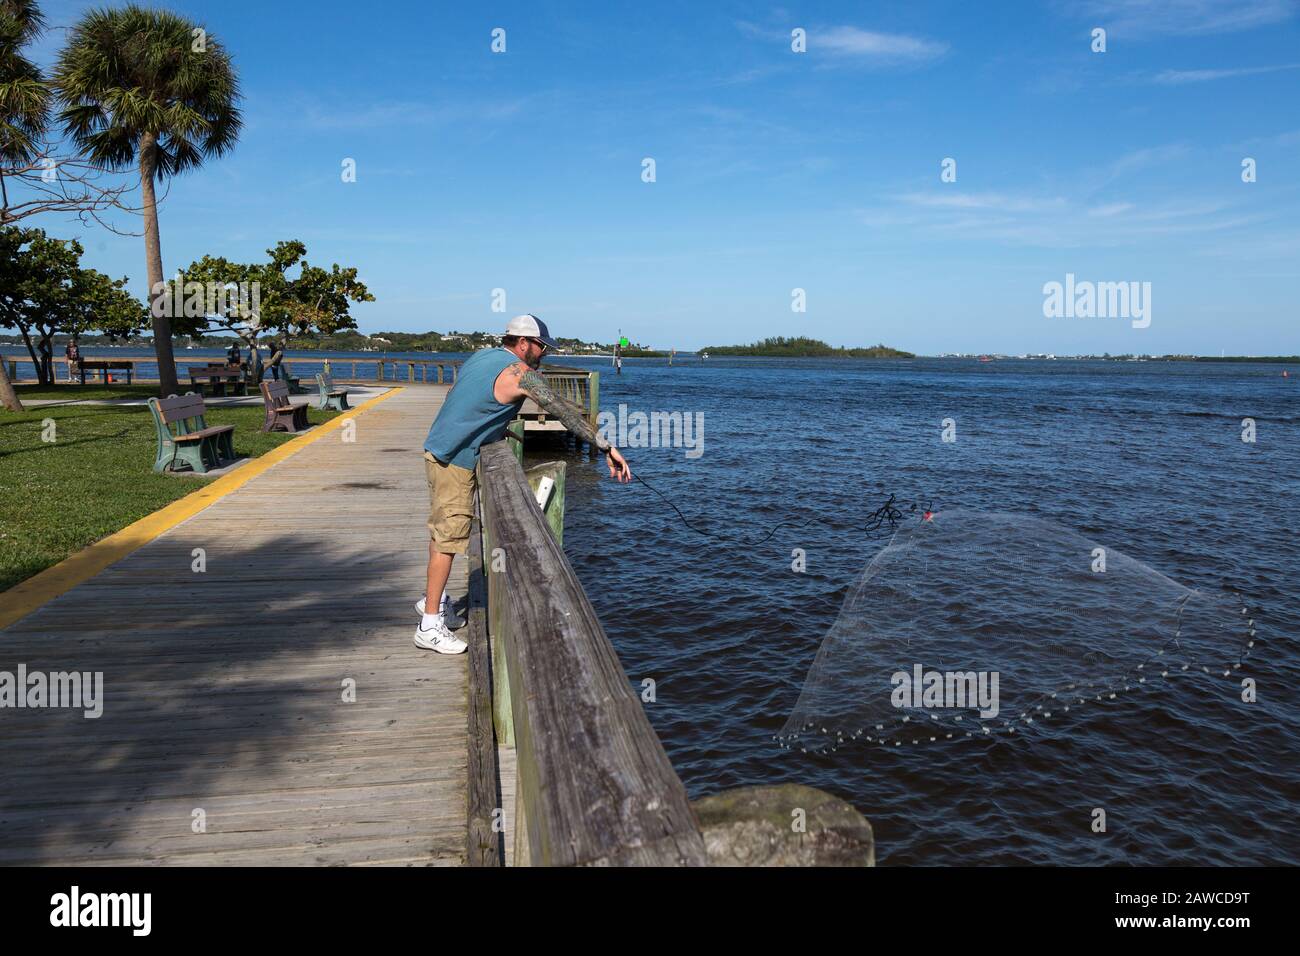 A fisherman casts his net into the Manatee Pocket at Sandsprit Park in Port Salerno, Florida, USA. Stock Photo